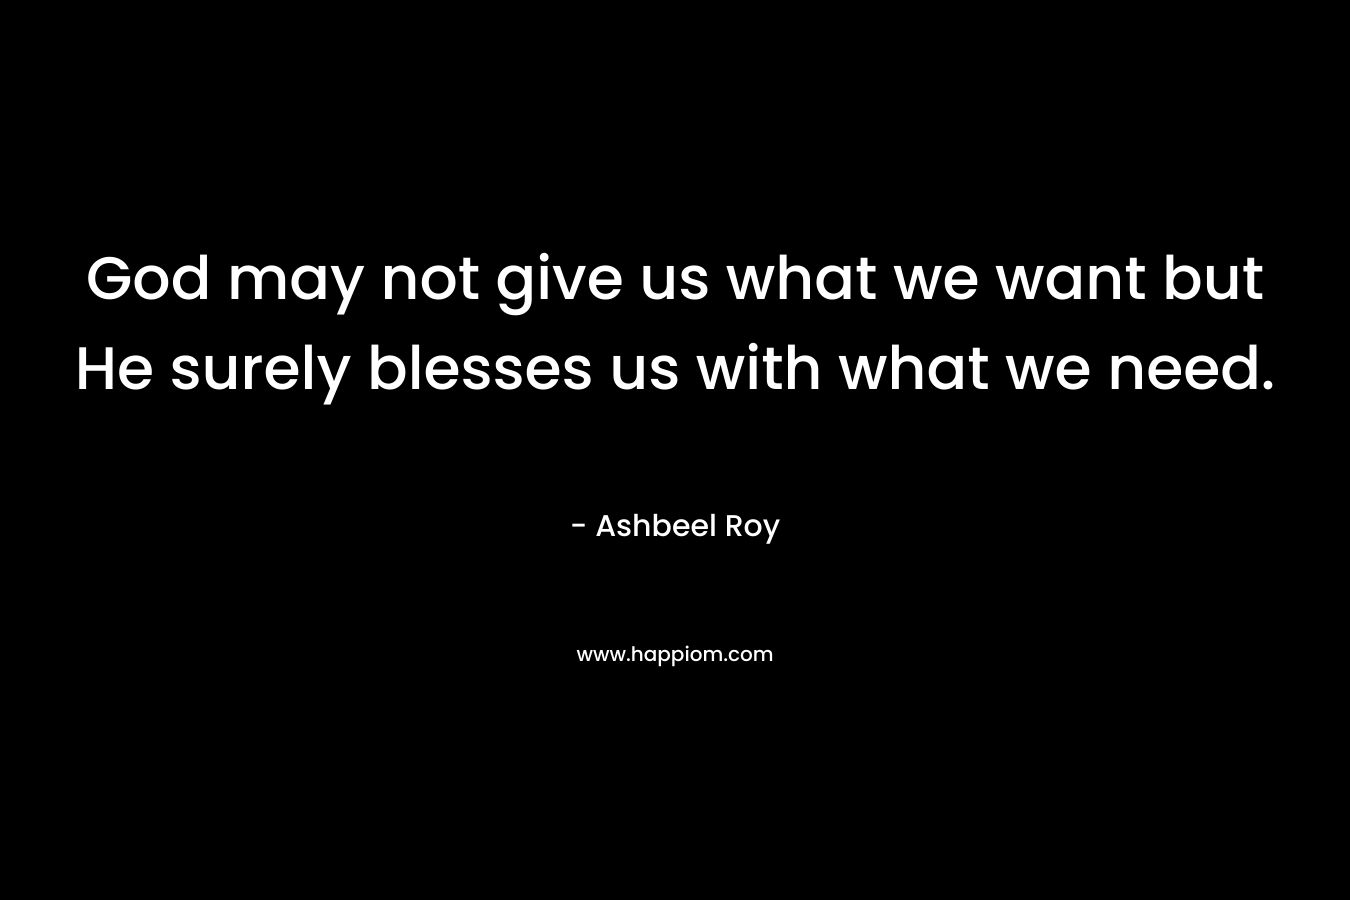 God may not give us what we want but He surely blesses us with what we need. – Ashbeel Roy